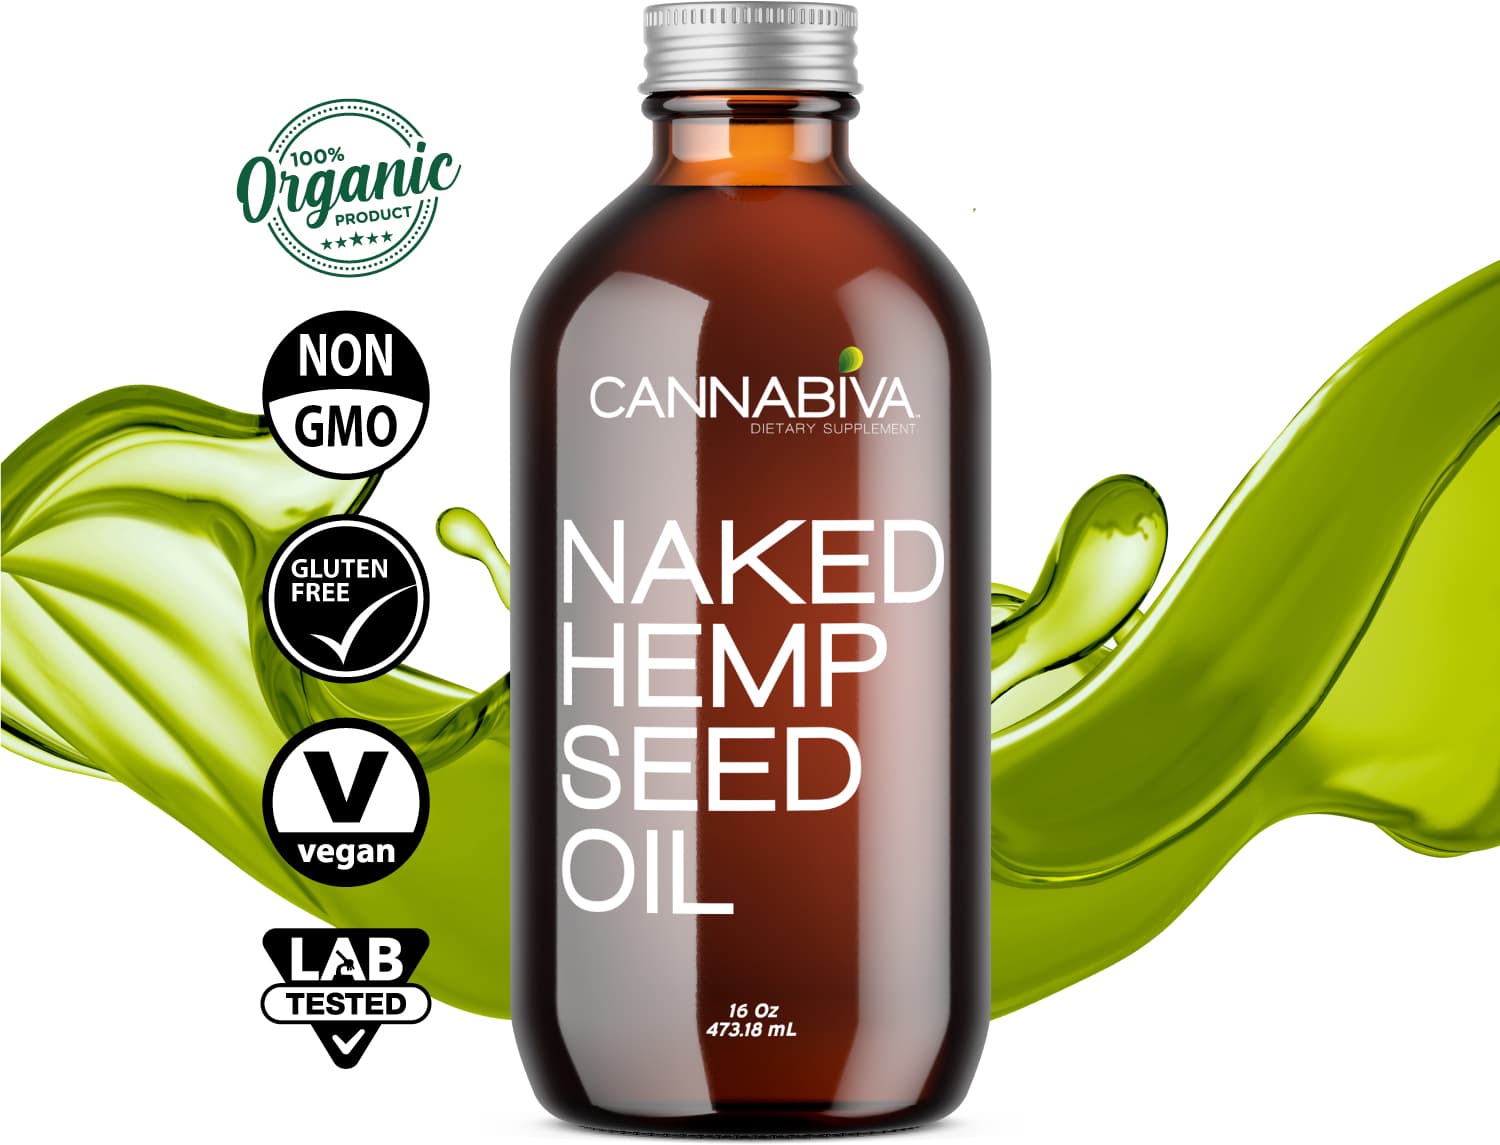 Discover the Powerful Benefits of Cannabiva Naked Hemp Seed Oil